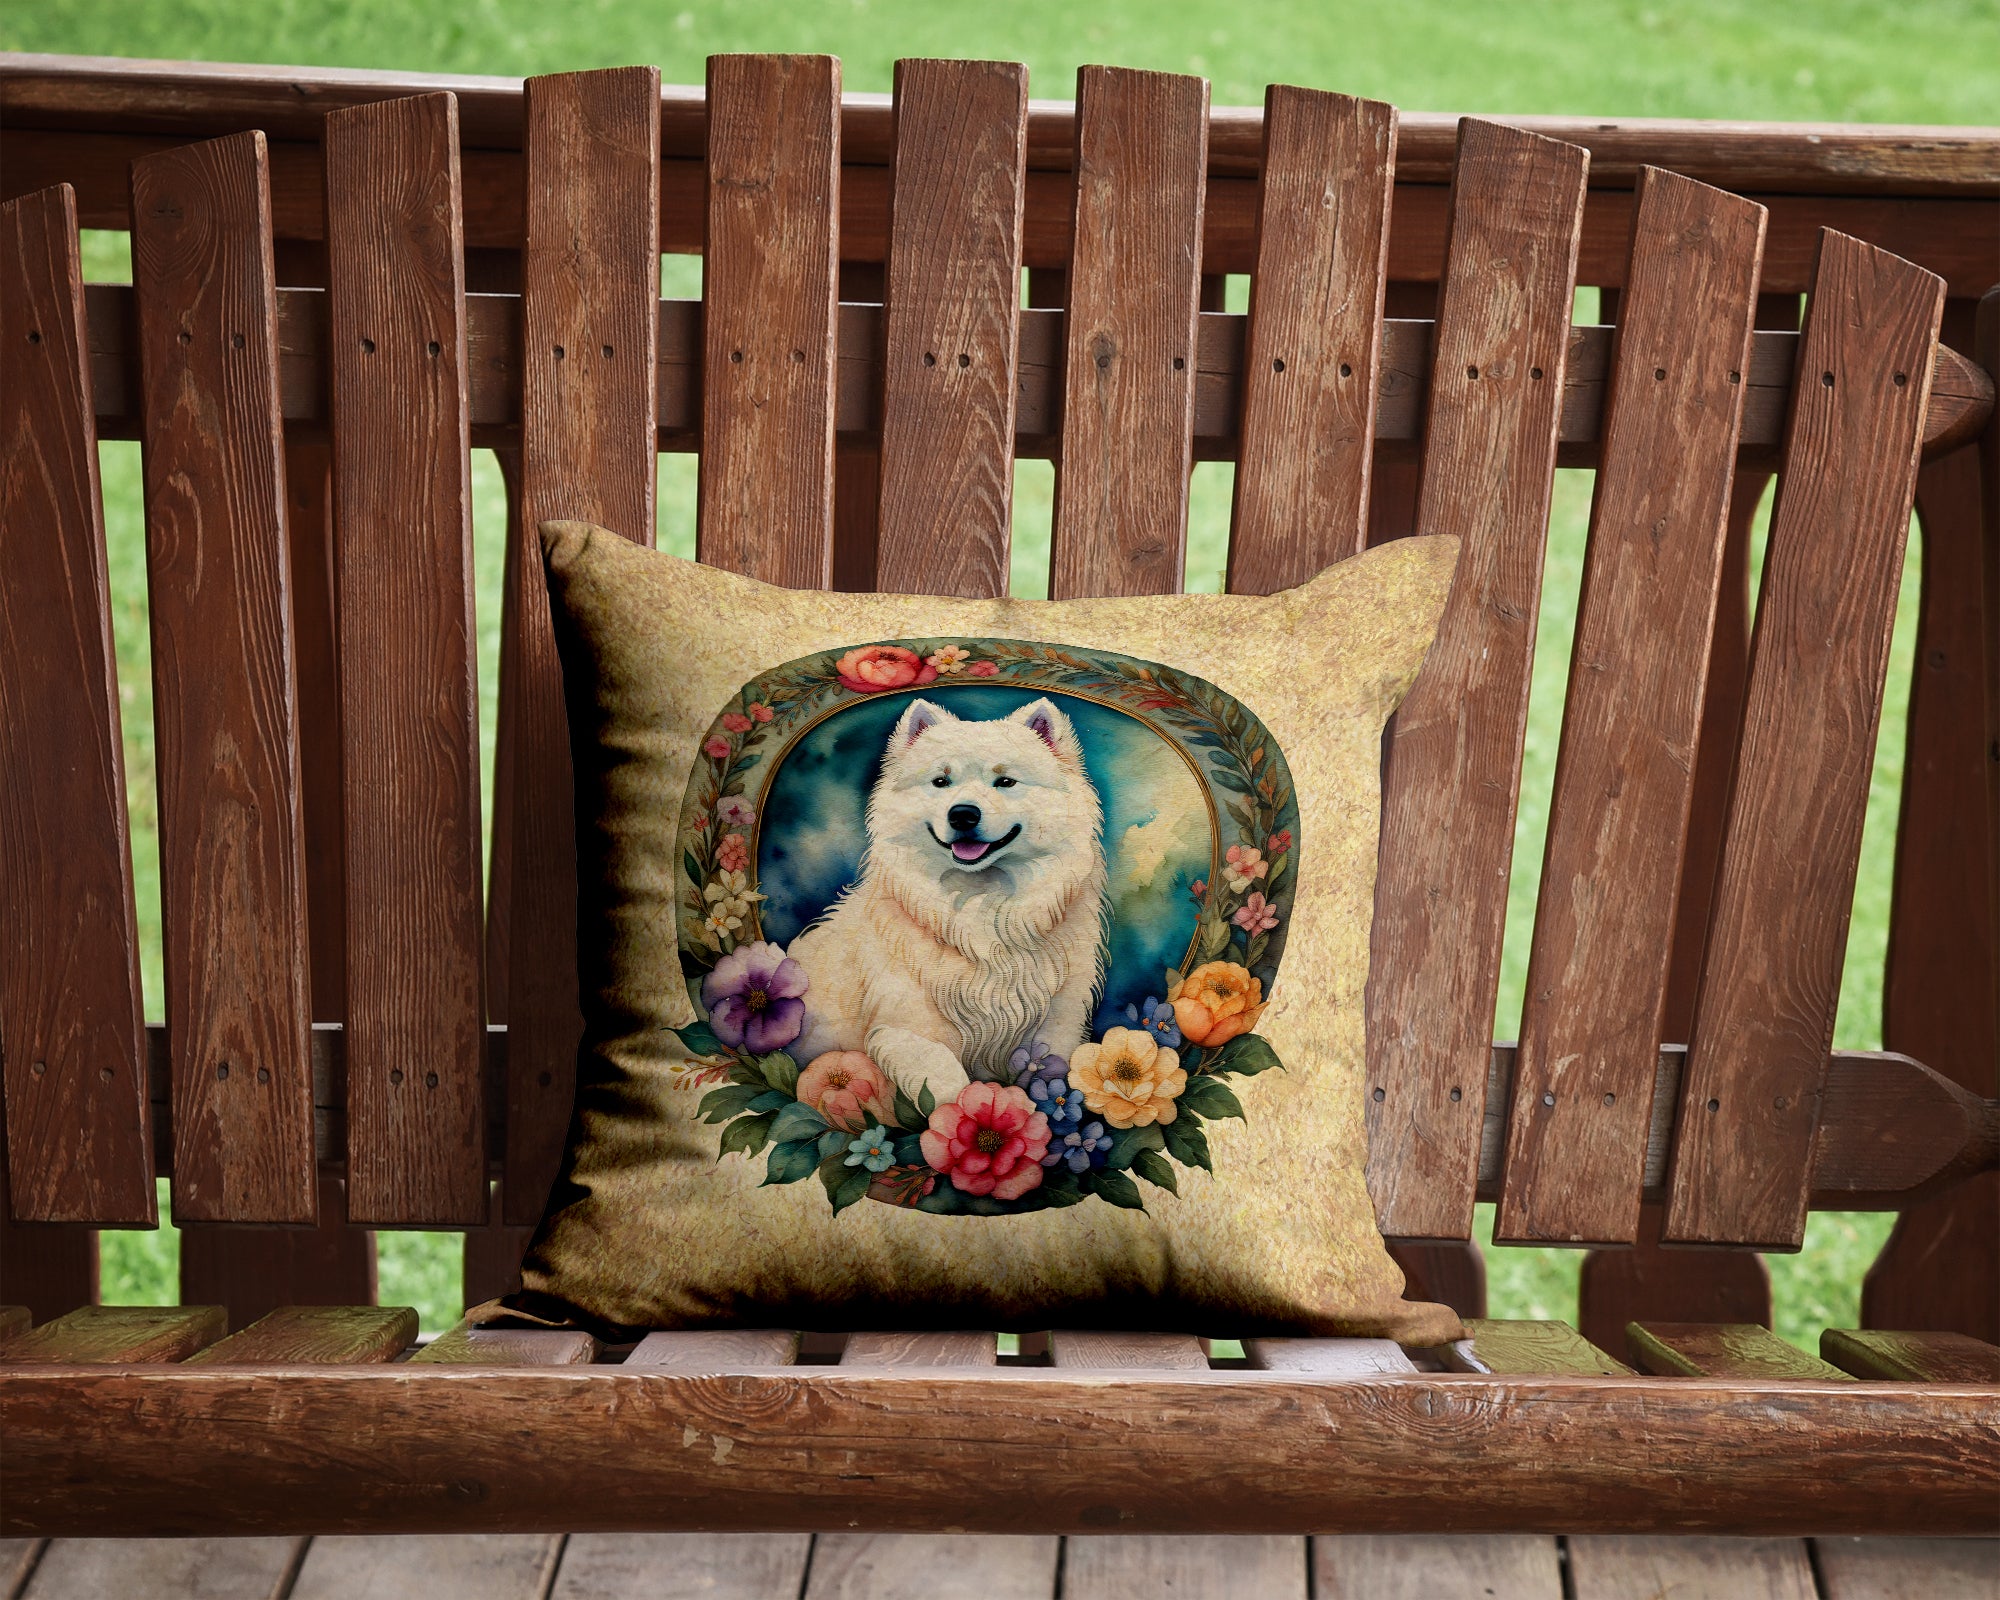 Buy this Samoyed and Flowers Fabric Decorative Pillow